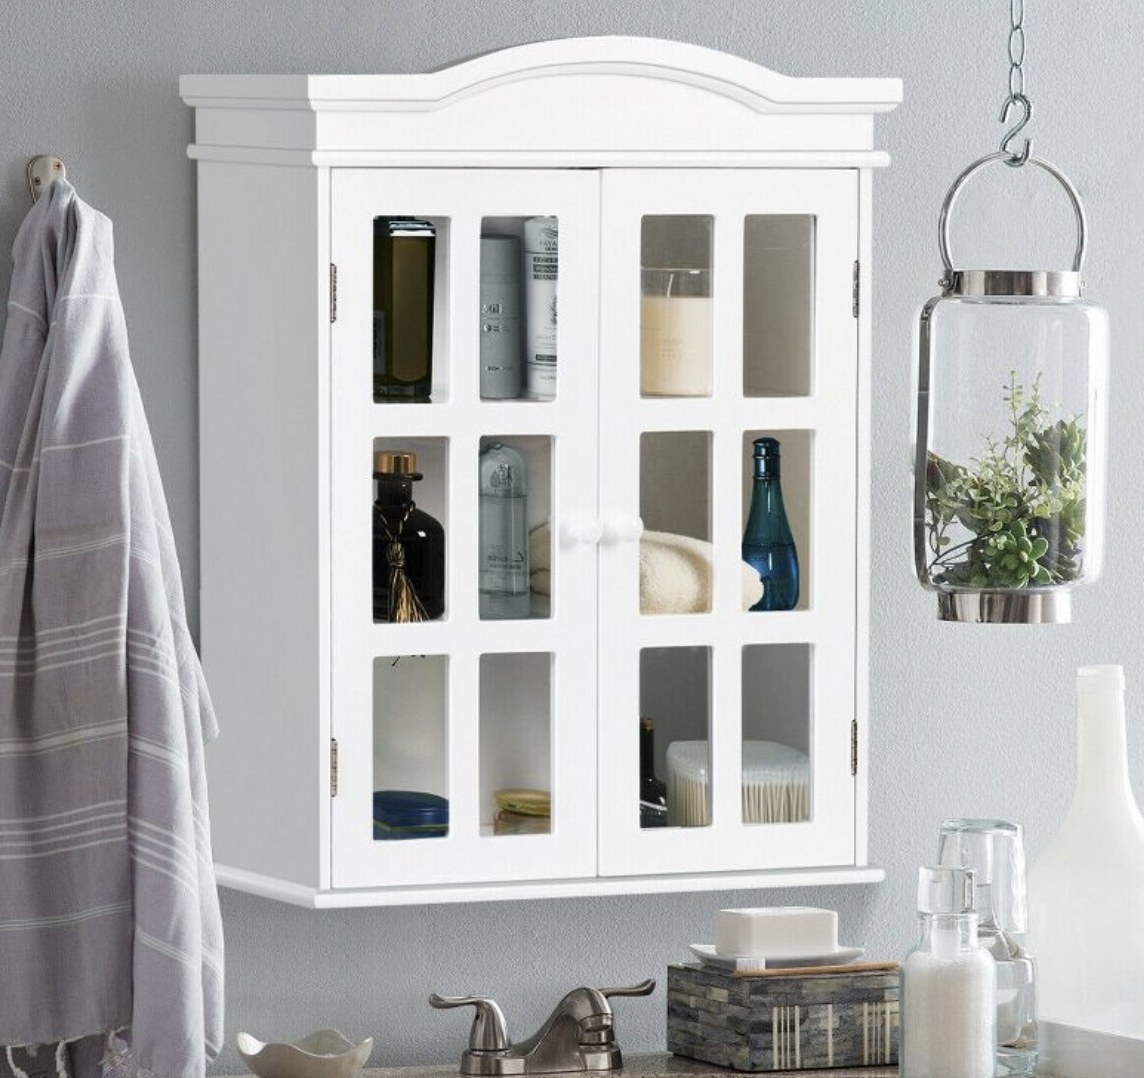 A white wall-mount storage cabinet with transparent door panels